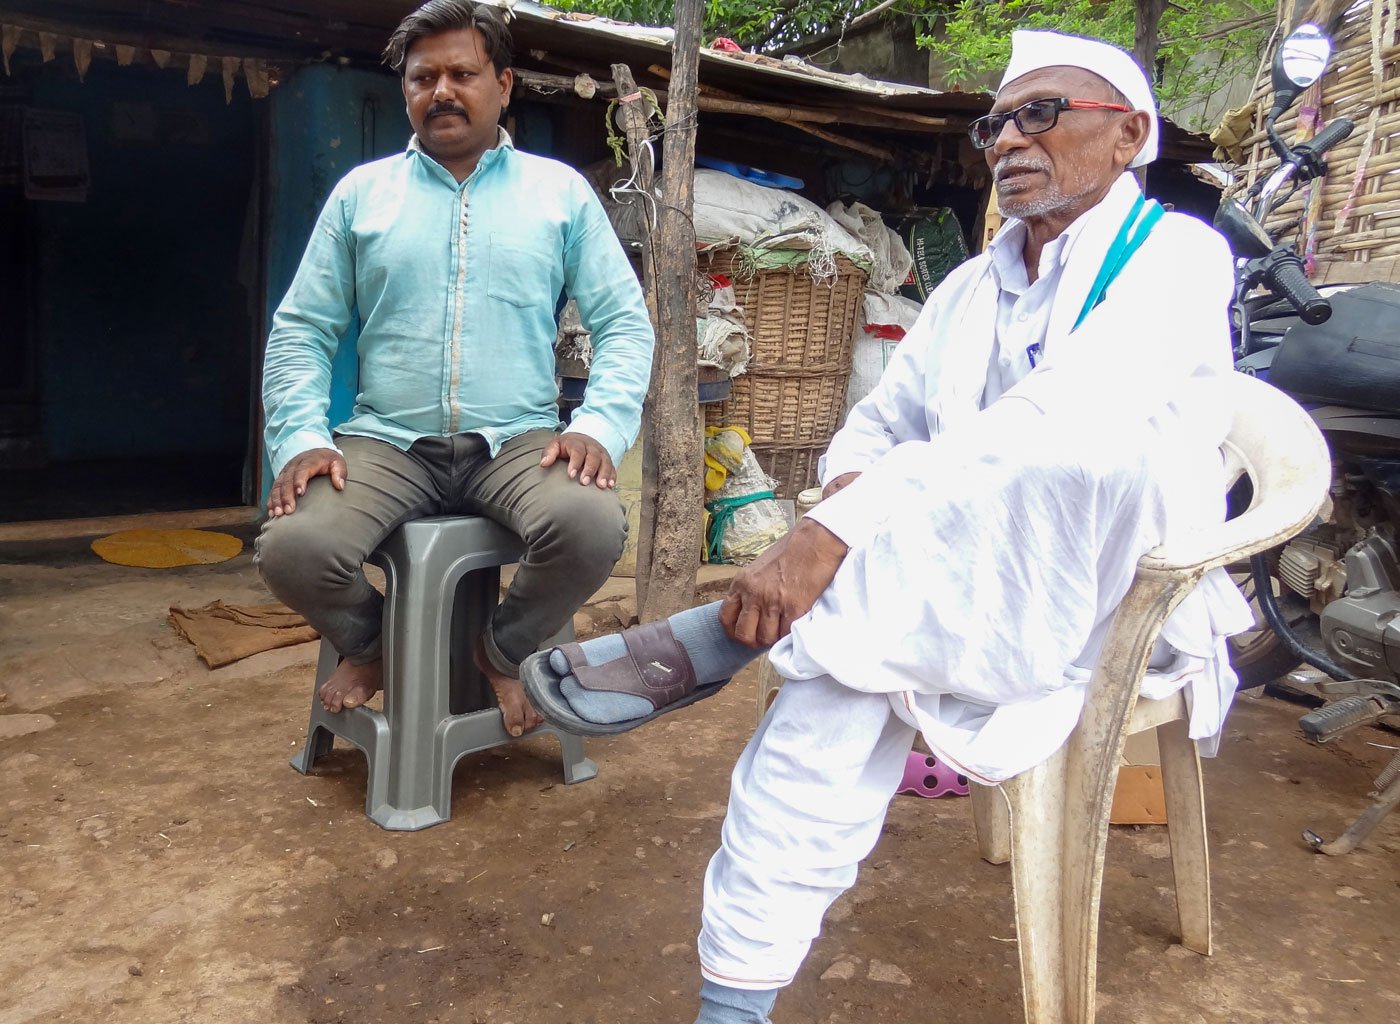 The 72-year-old activist resting at Gopal Bonde’s home in Chiprala, talking to him (left) and his family about filing claims